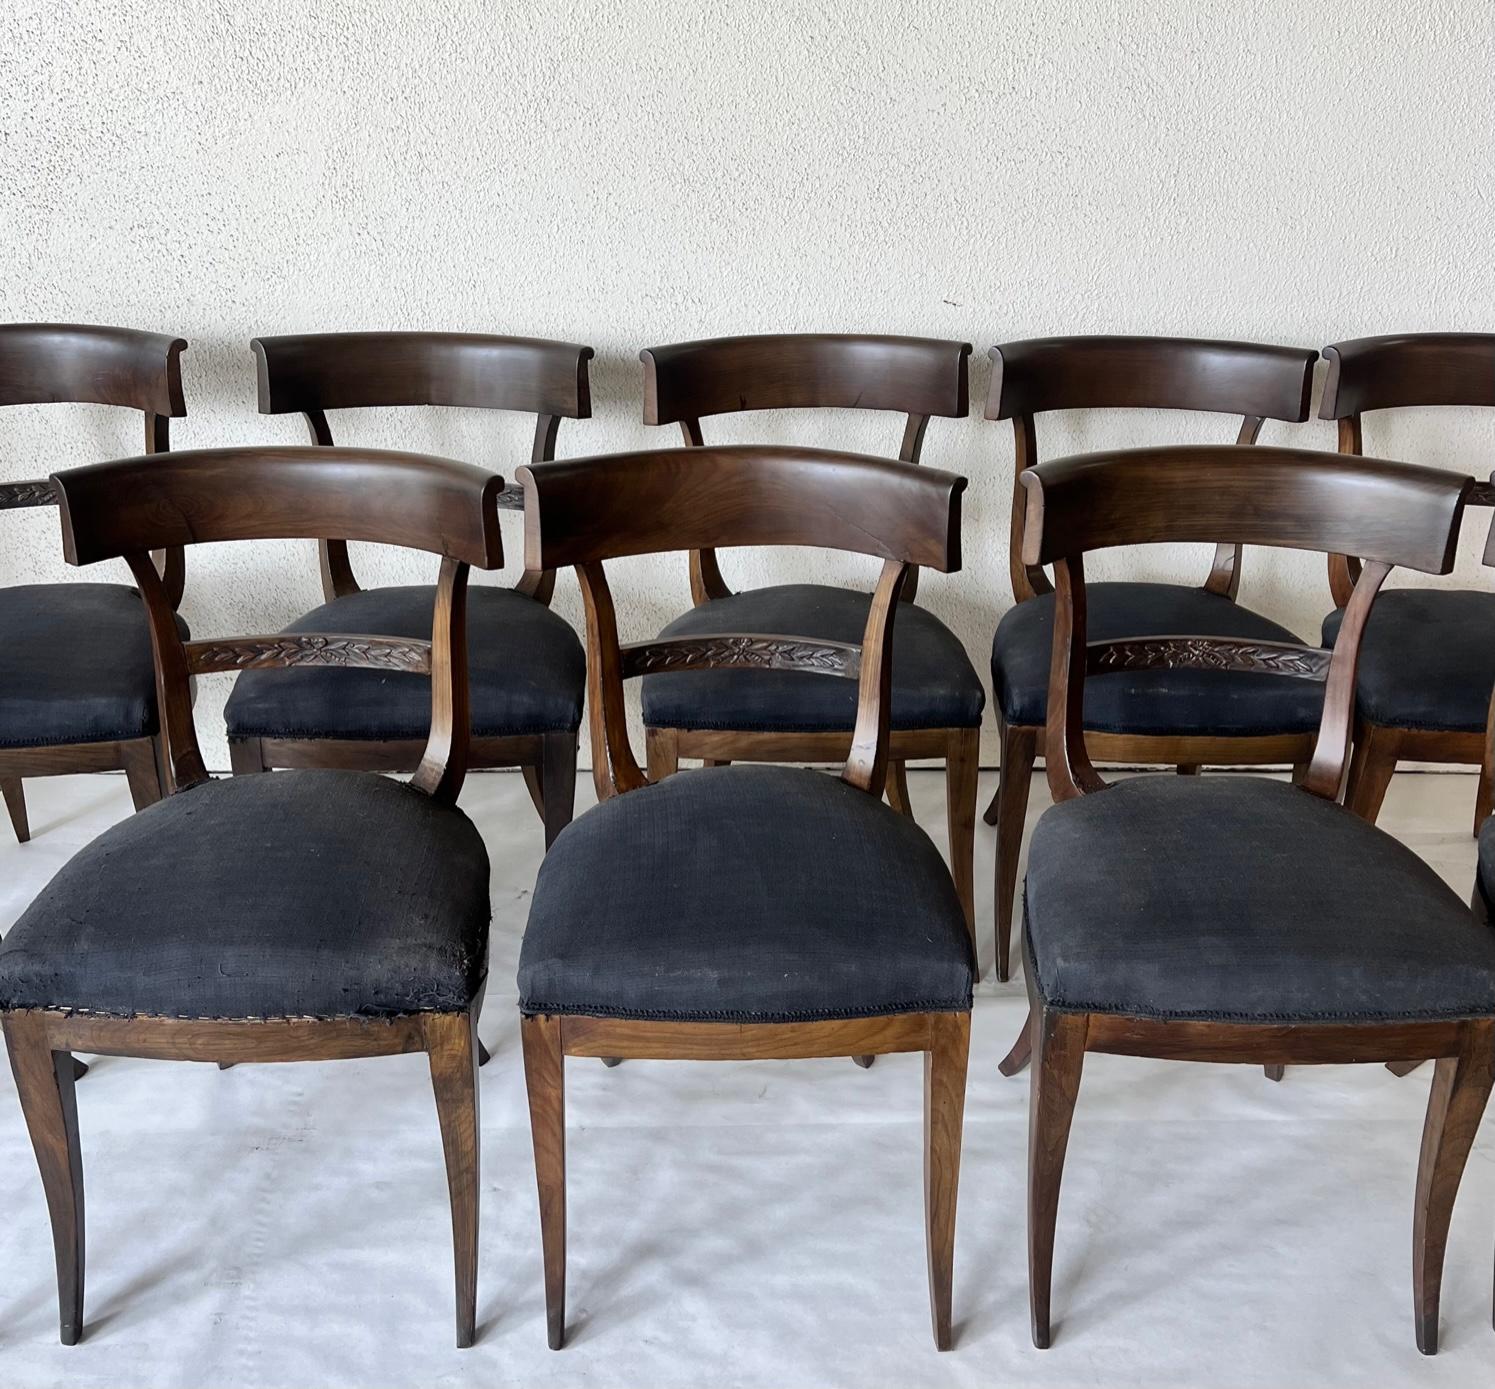 French Provincial 18th C Italian Klismos Chairs, Set of 10 For Sale